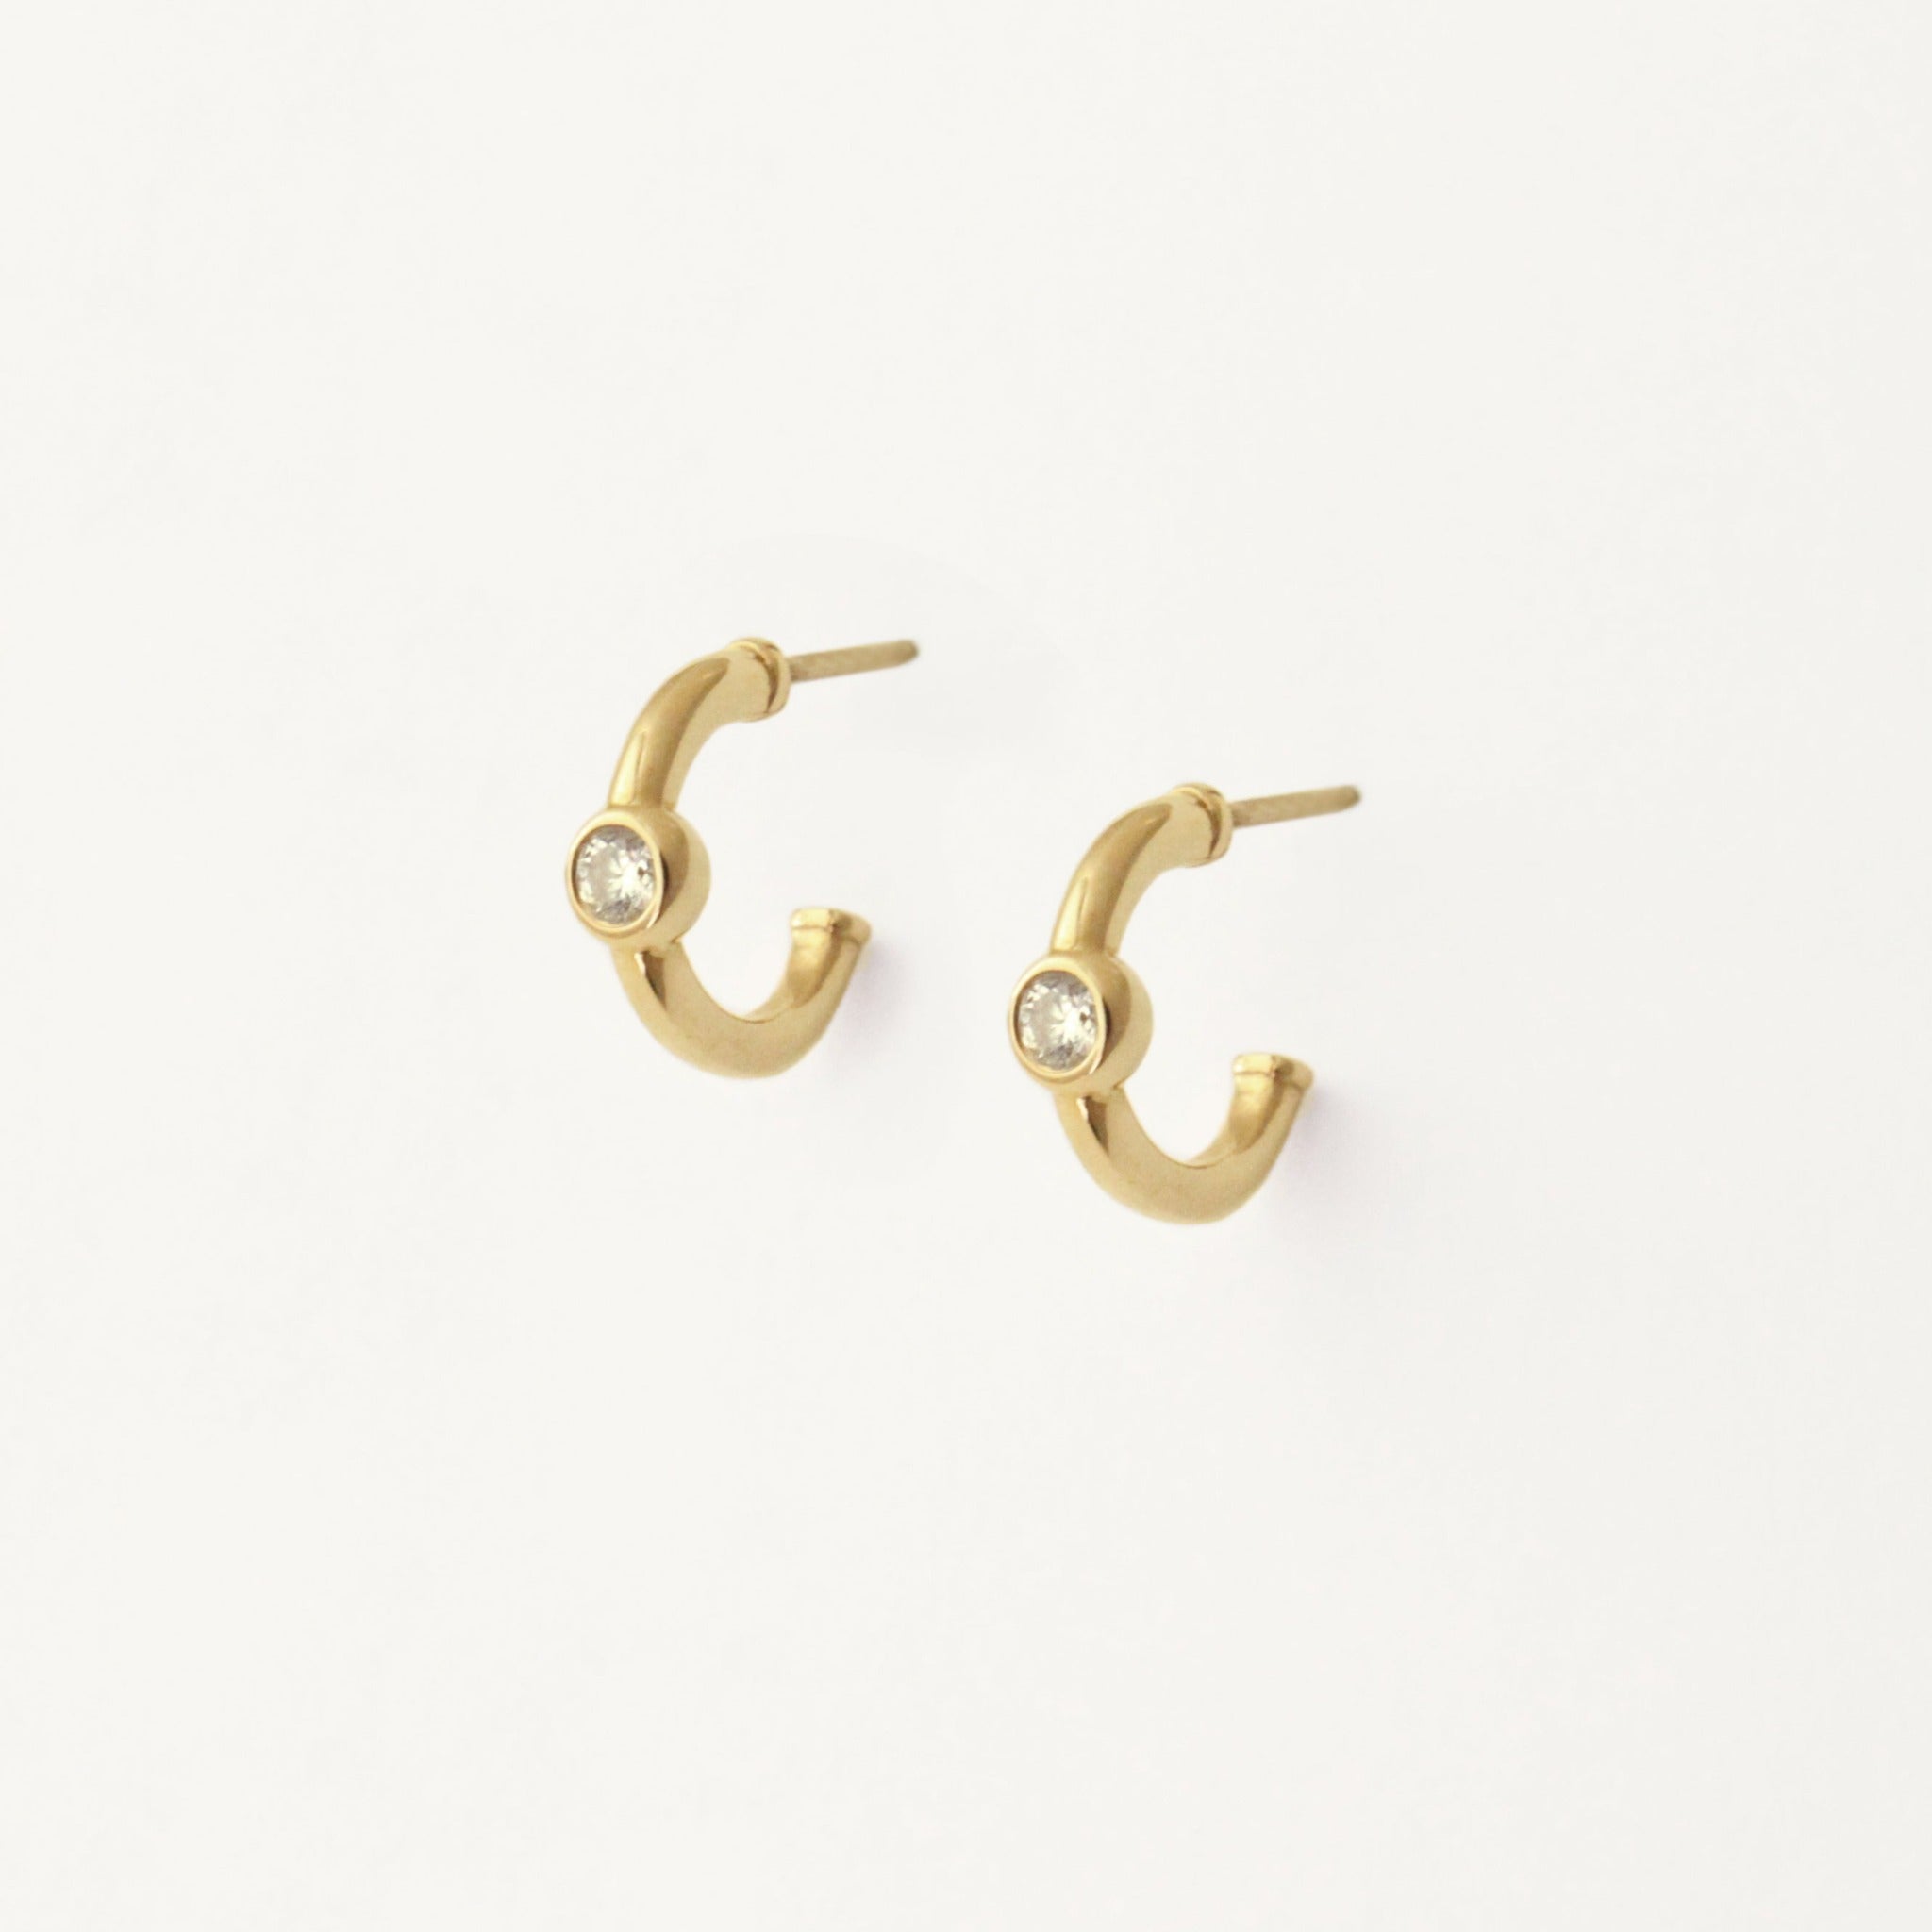 Diamond hoops that are meant to be worn every day.